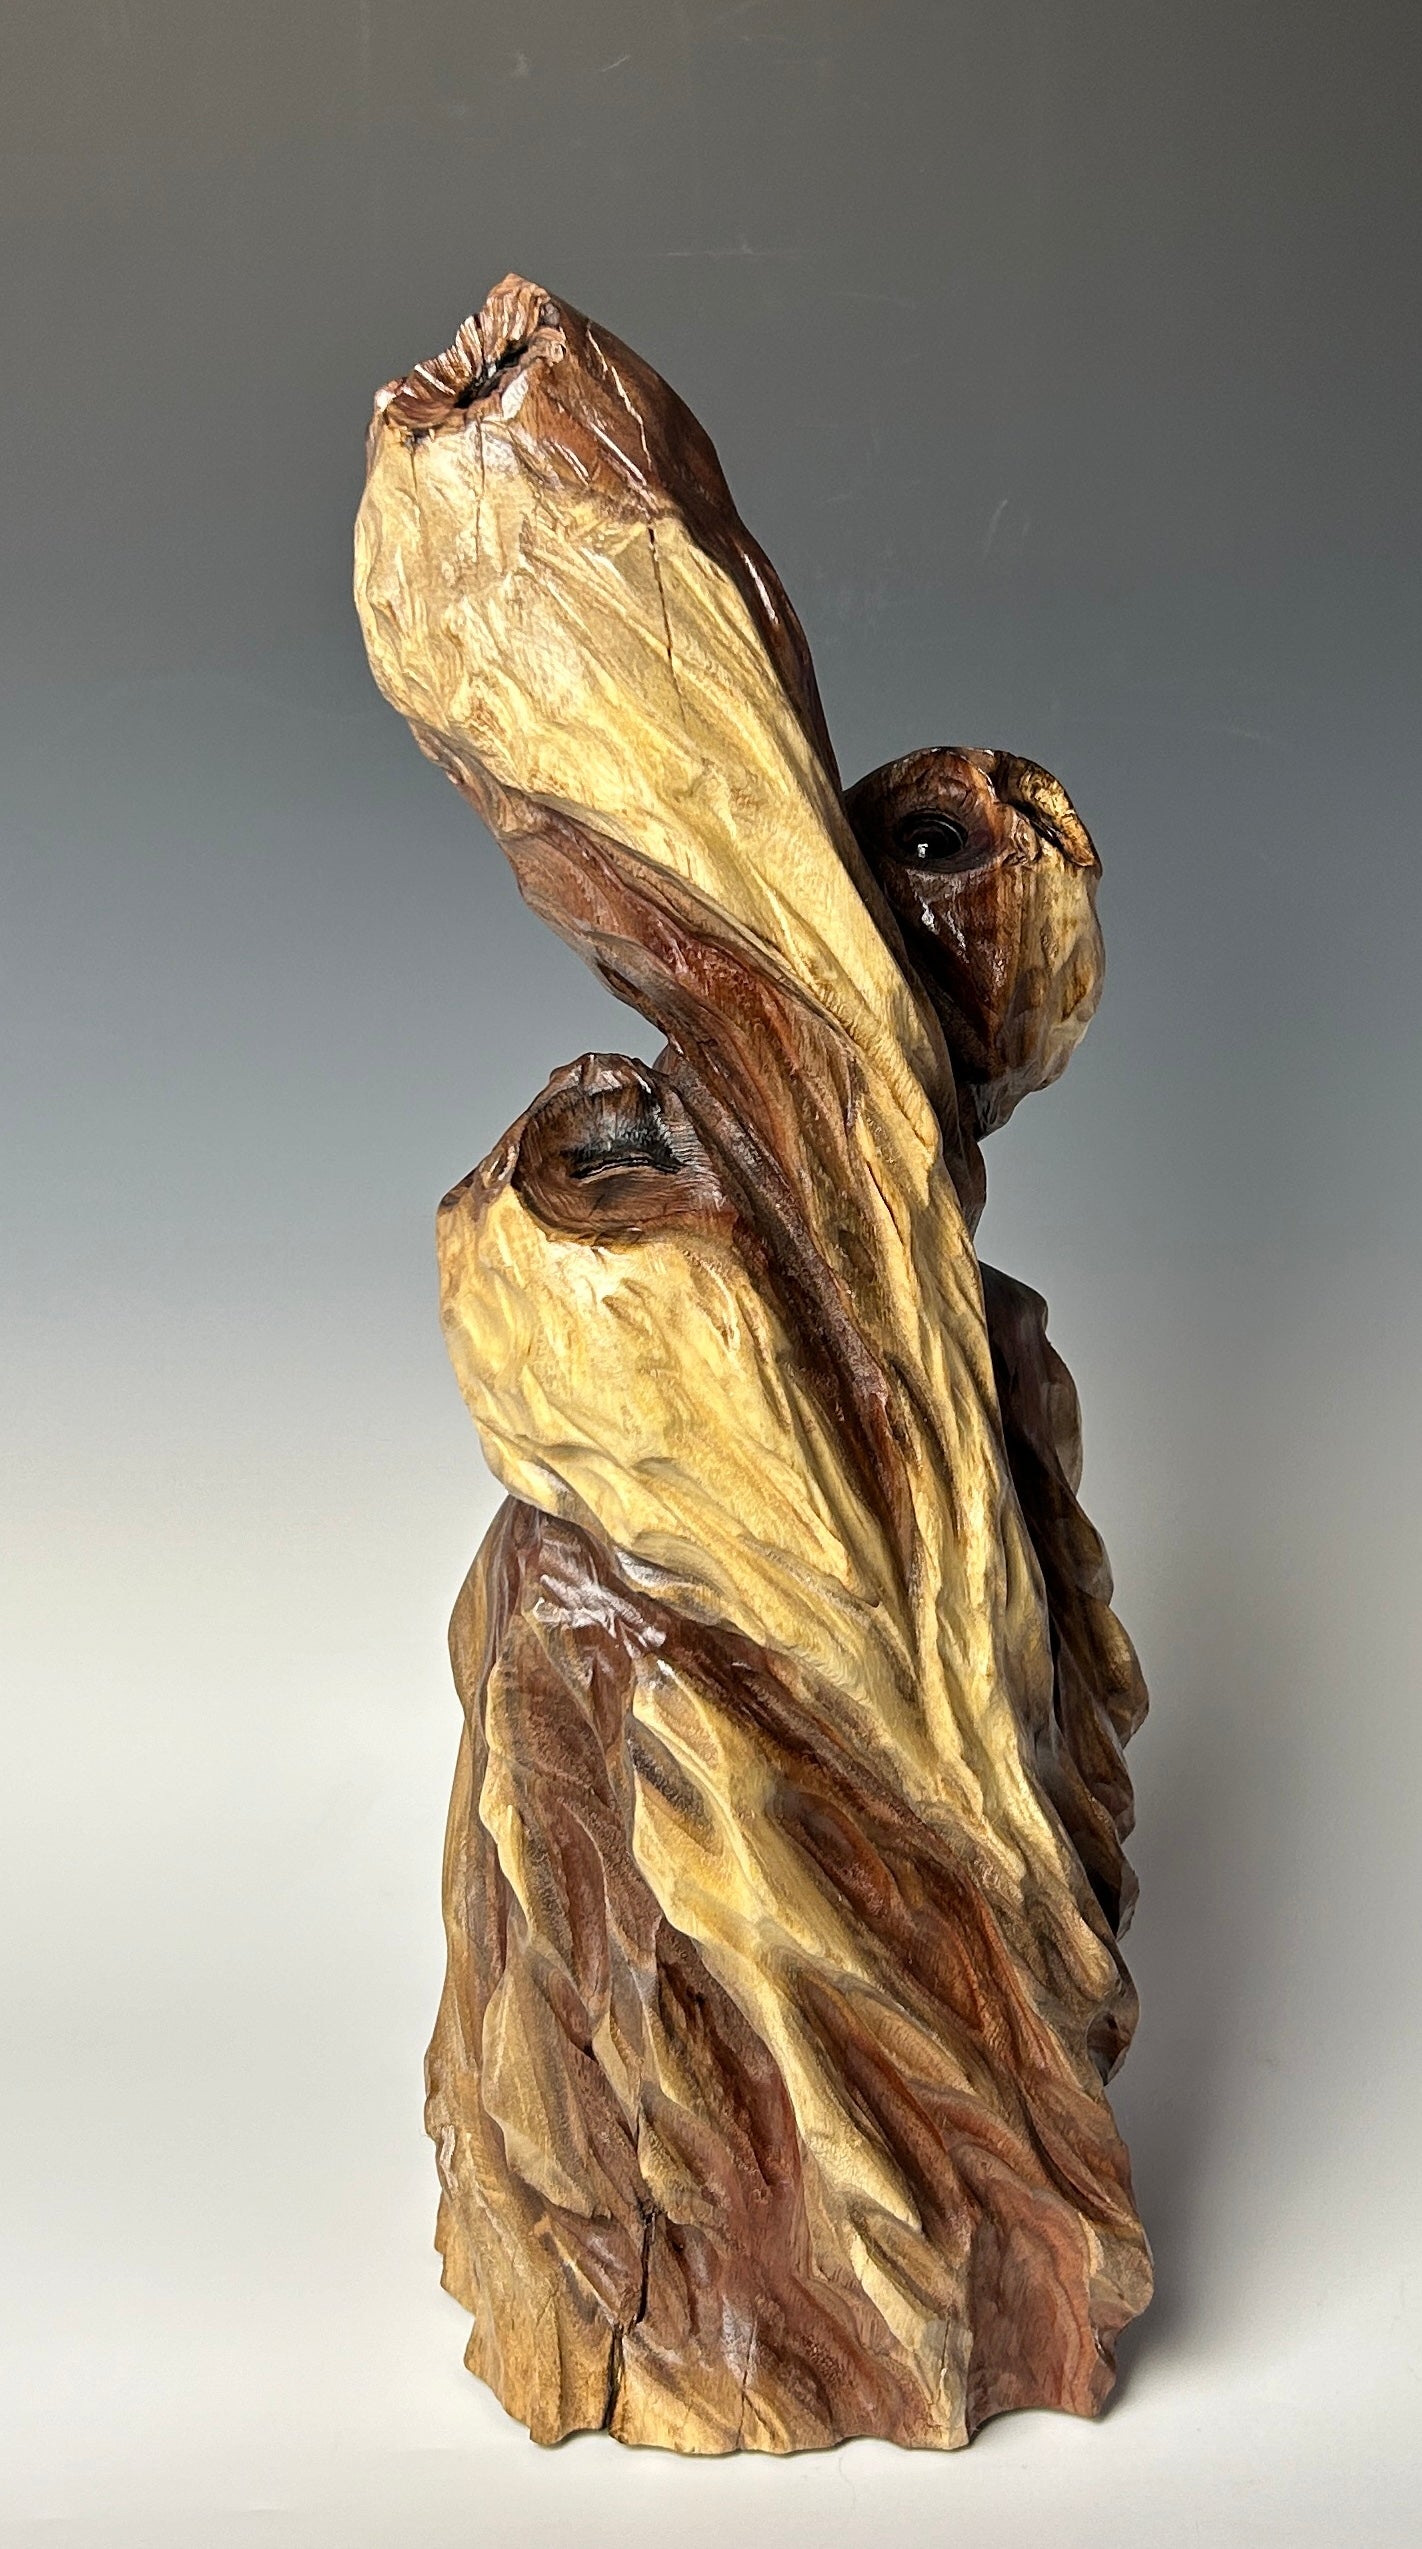 "BATHED IN MOONLIGHT" HAND CARVED WOOD SCULPTURE